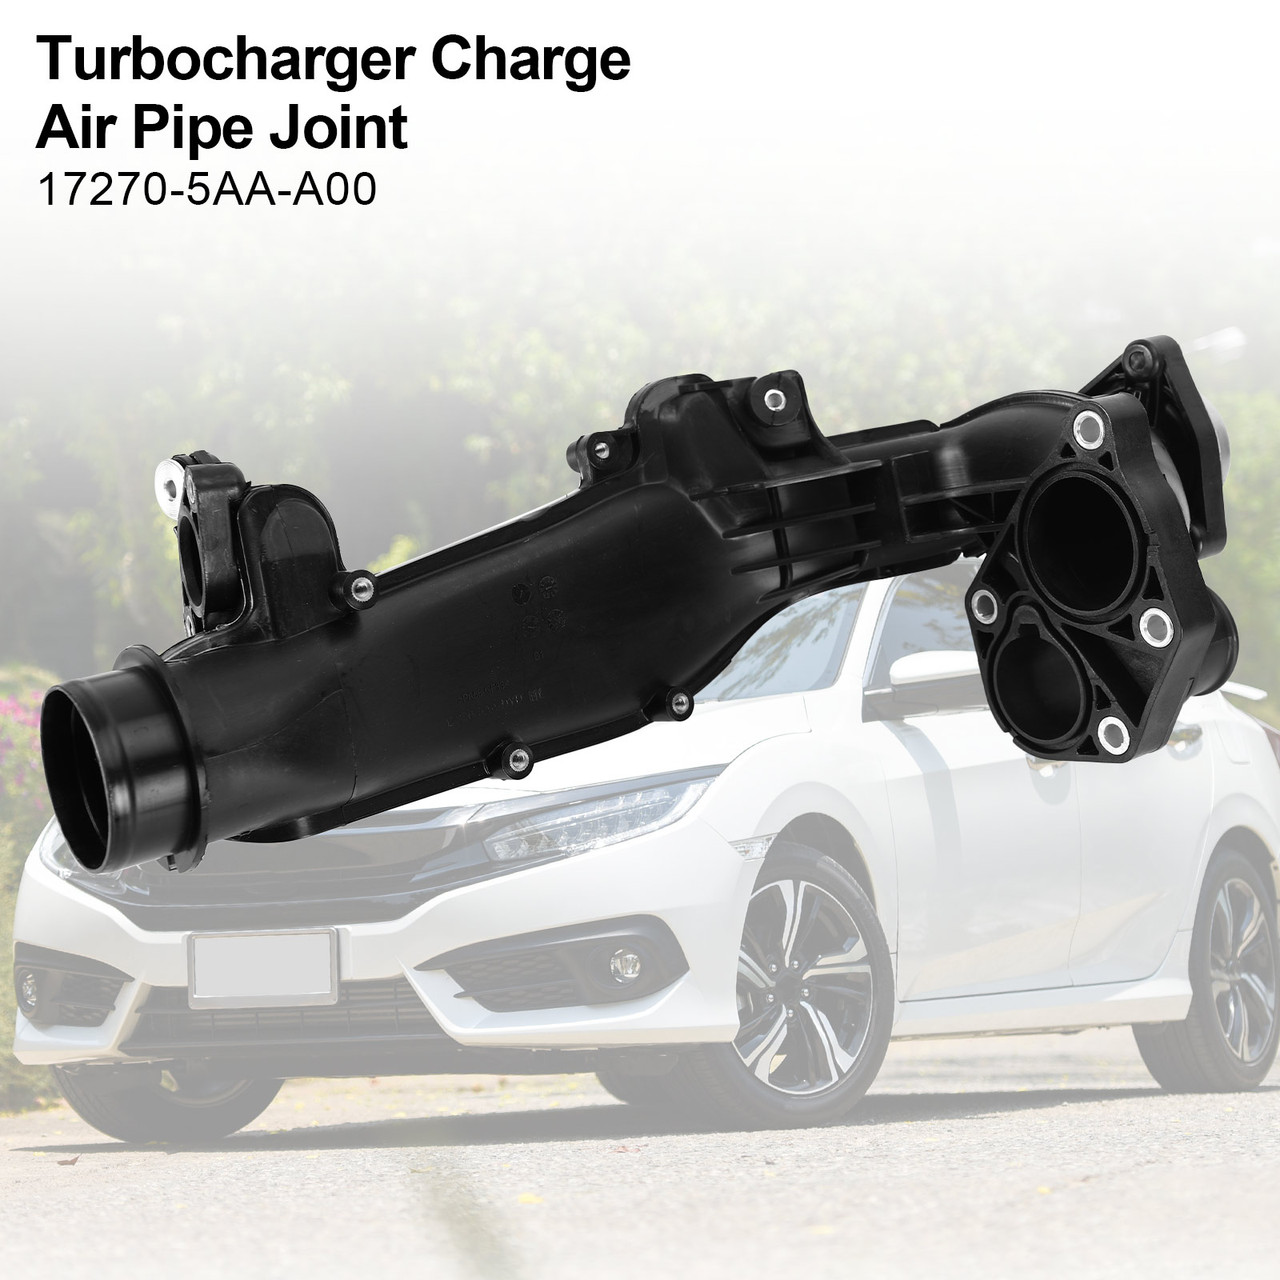 Turbocharger Charge Air Pipe Joint Fit for Honda Civic 1.5L 16-19 17270-5AA-A00